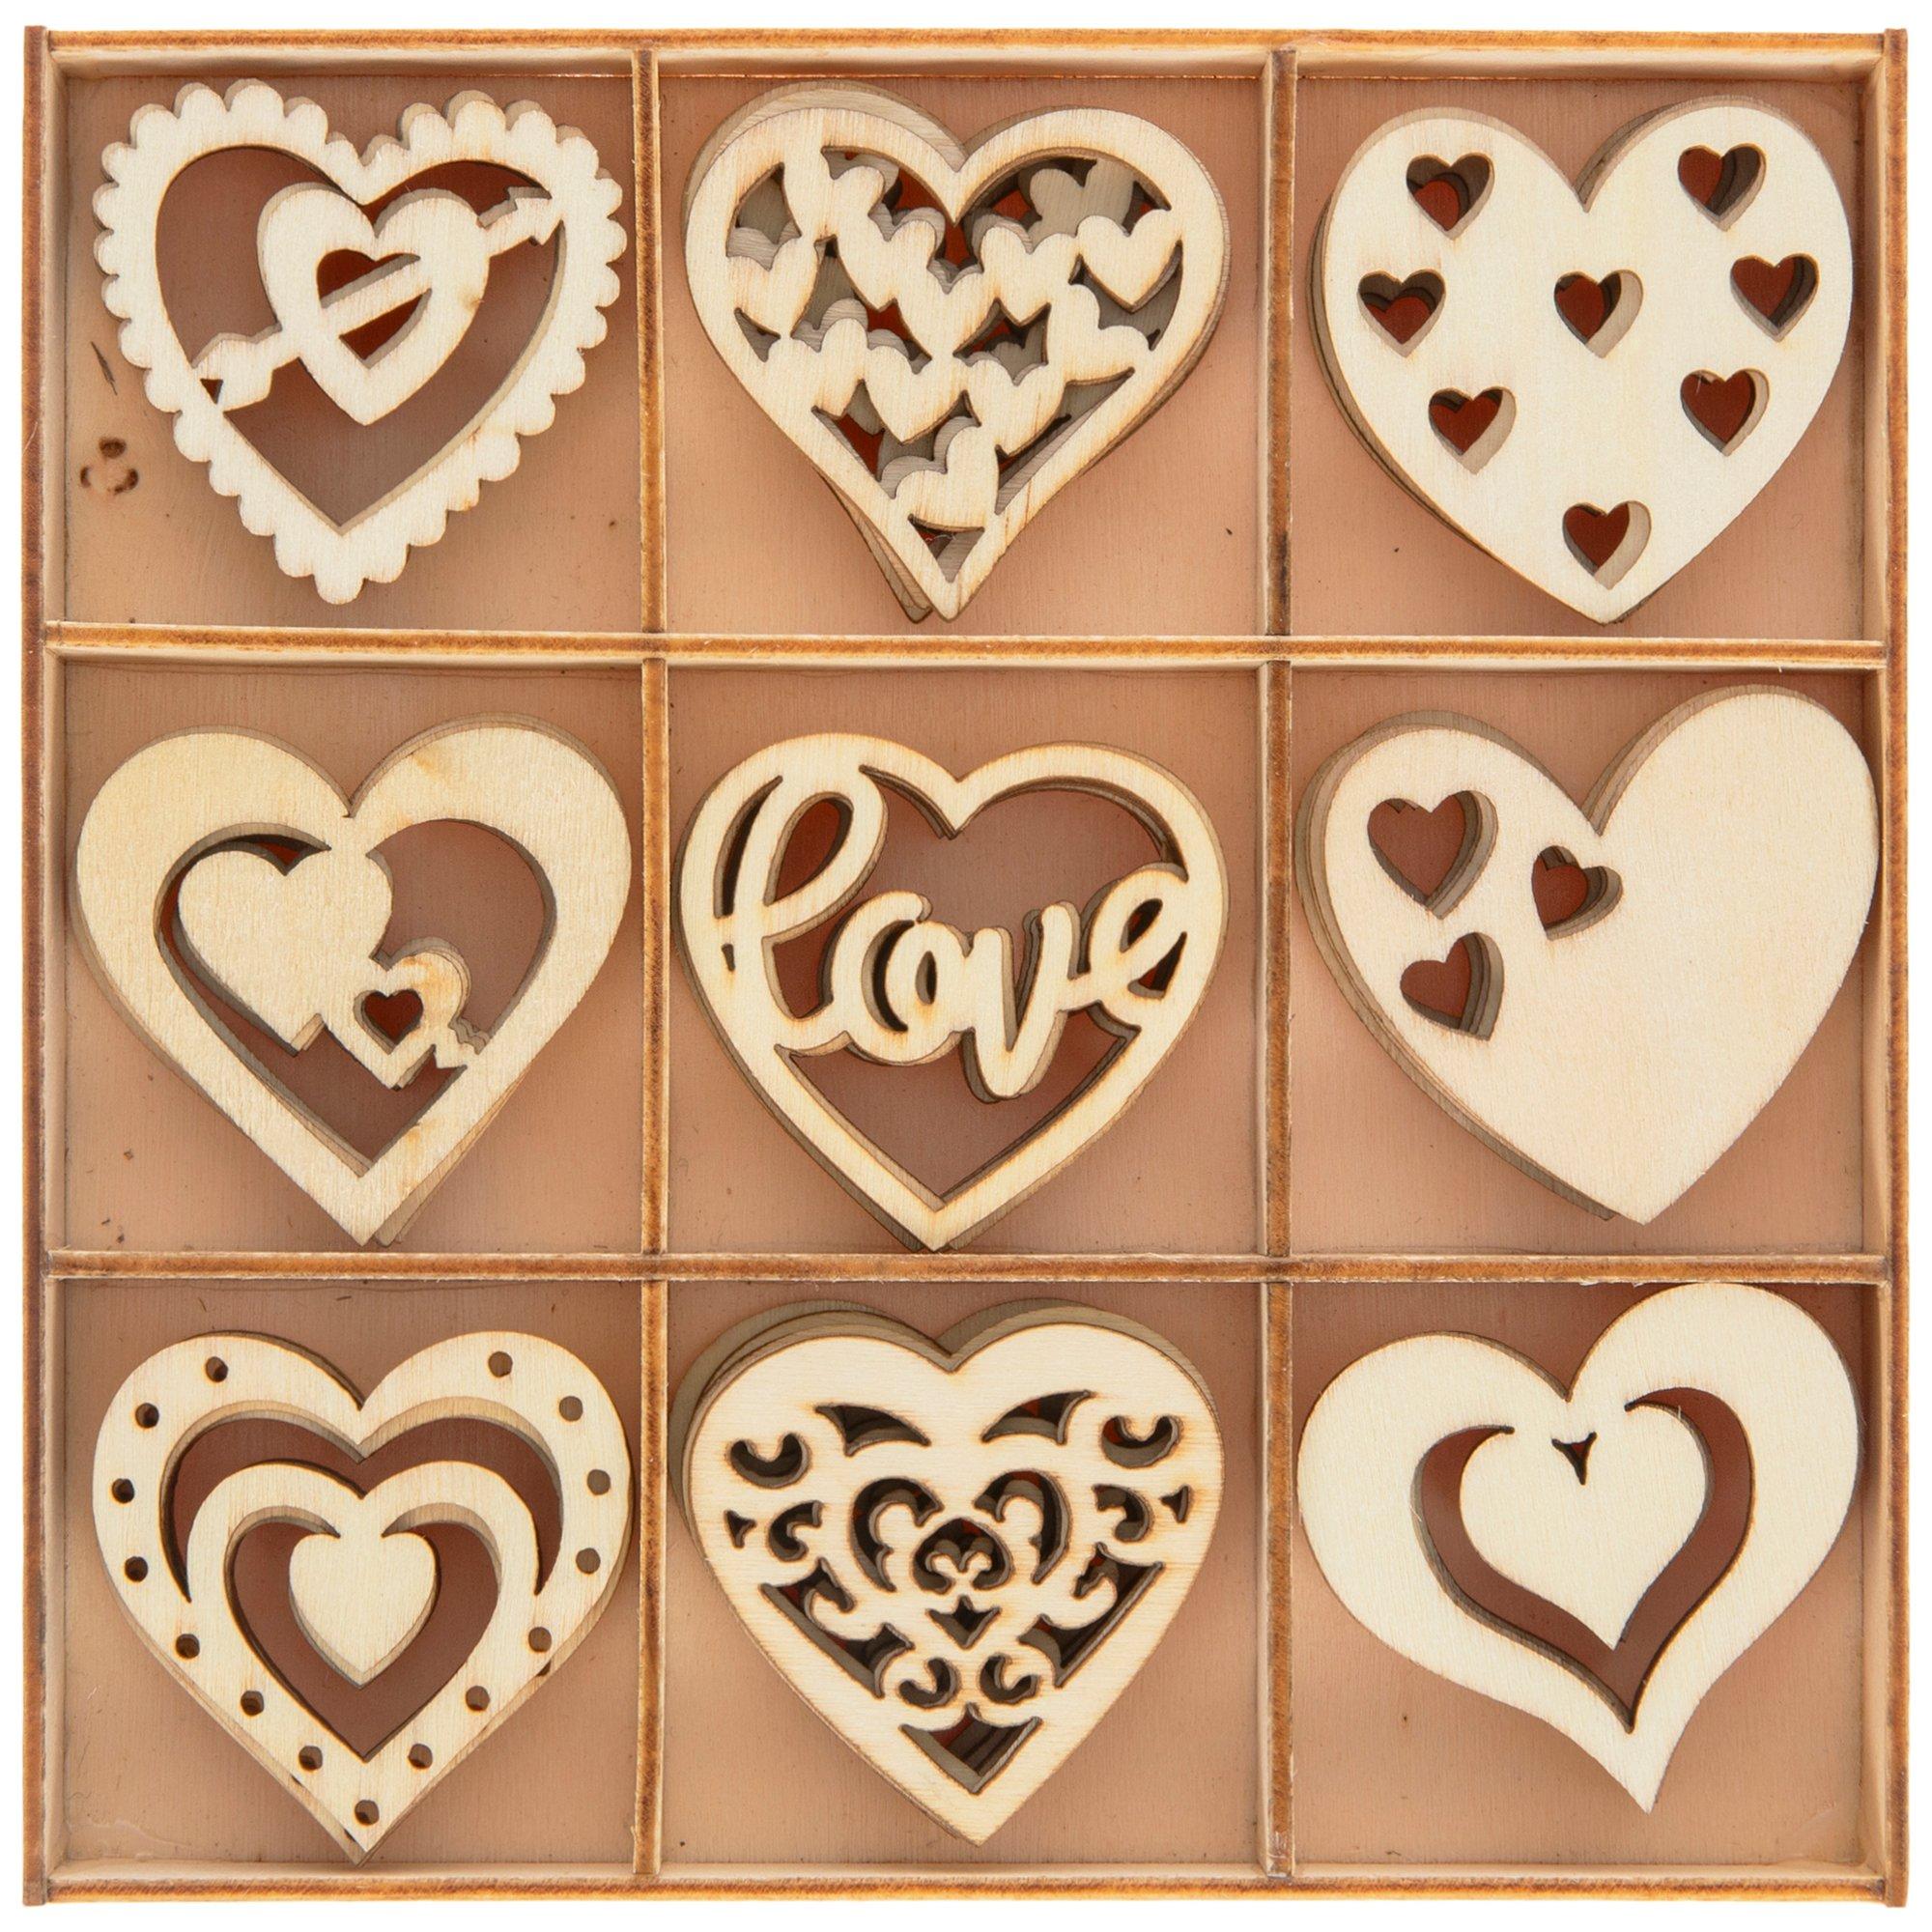 20mm Wooden Heart-shaped Buttons - pack of 5 – Cloud Craft